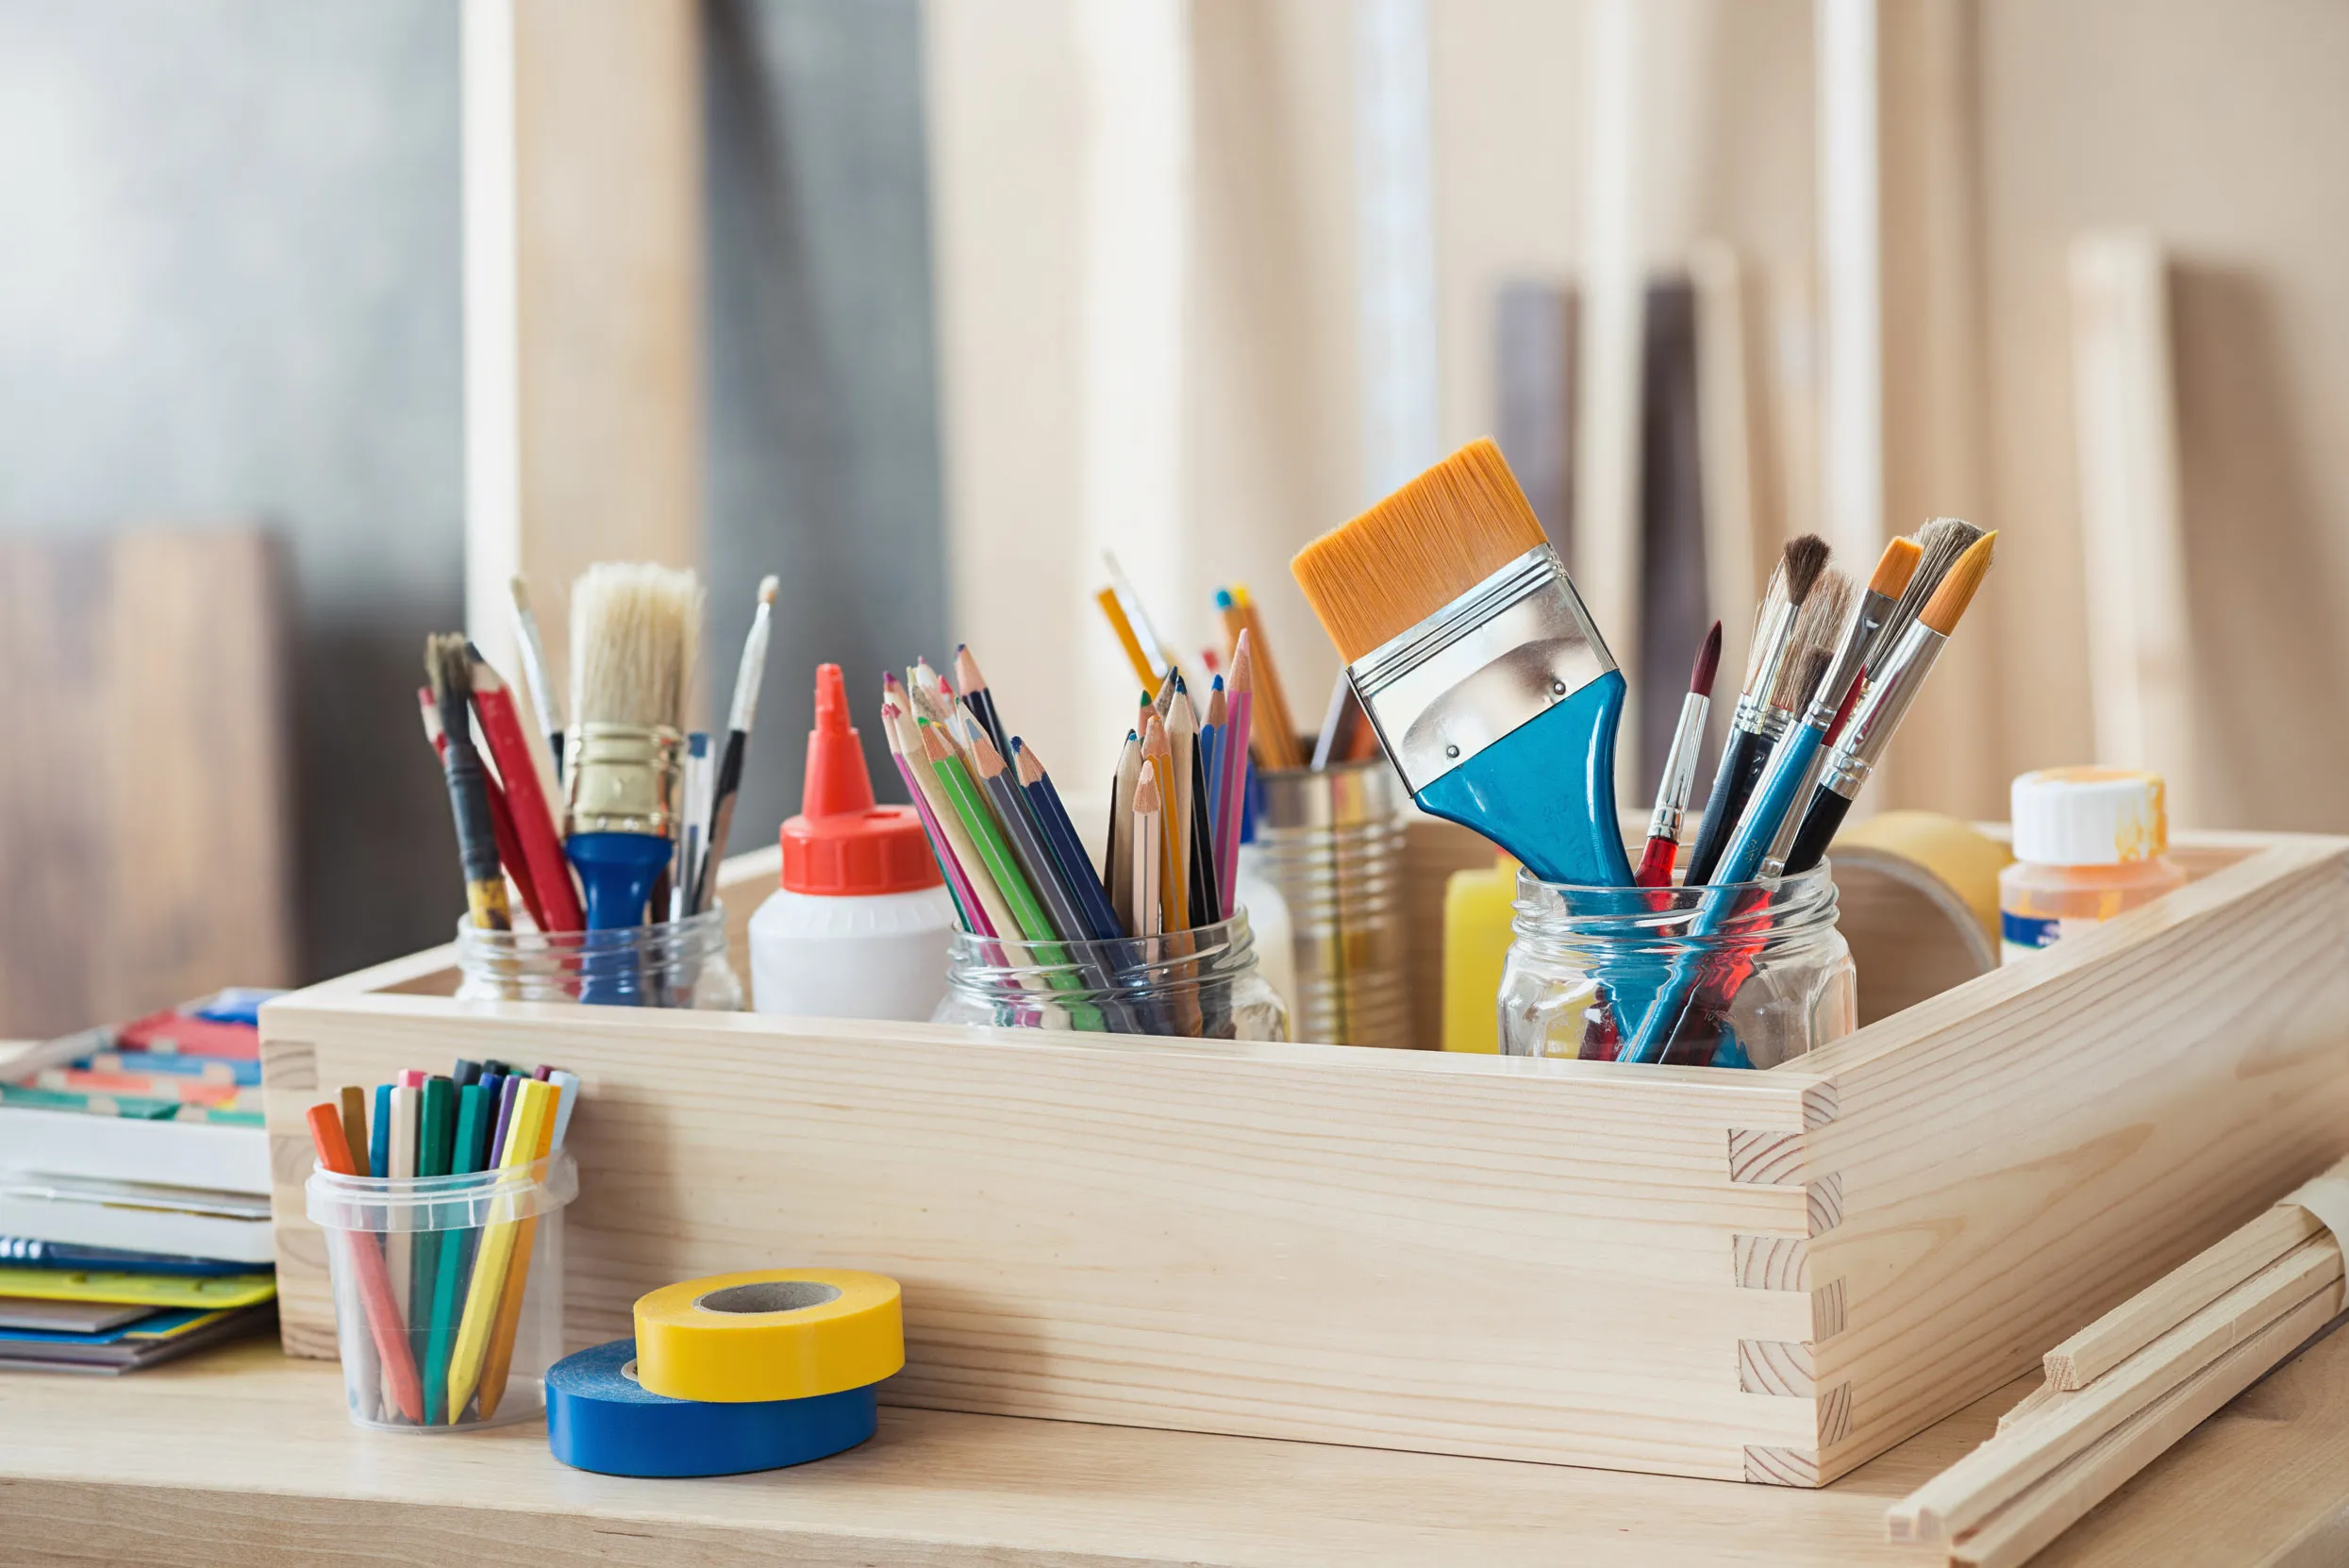 A wooden box sat on a table with a neat array of paintbrushes and craft supplies.